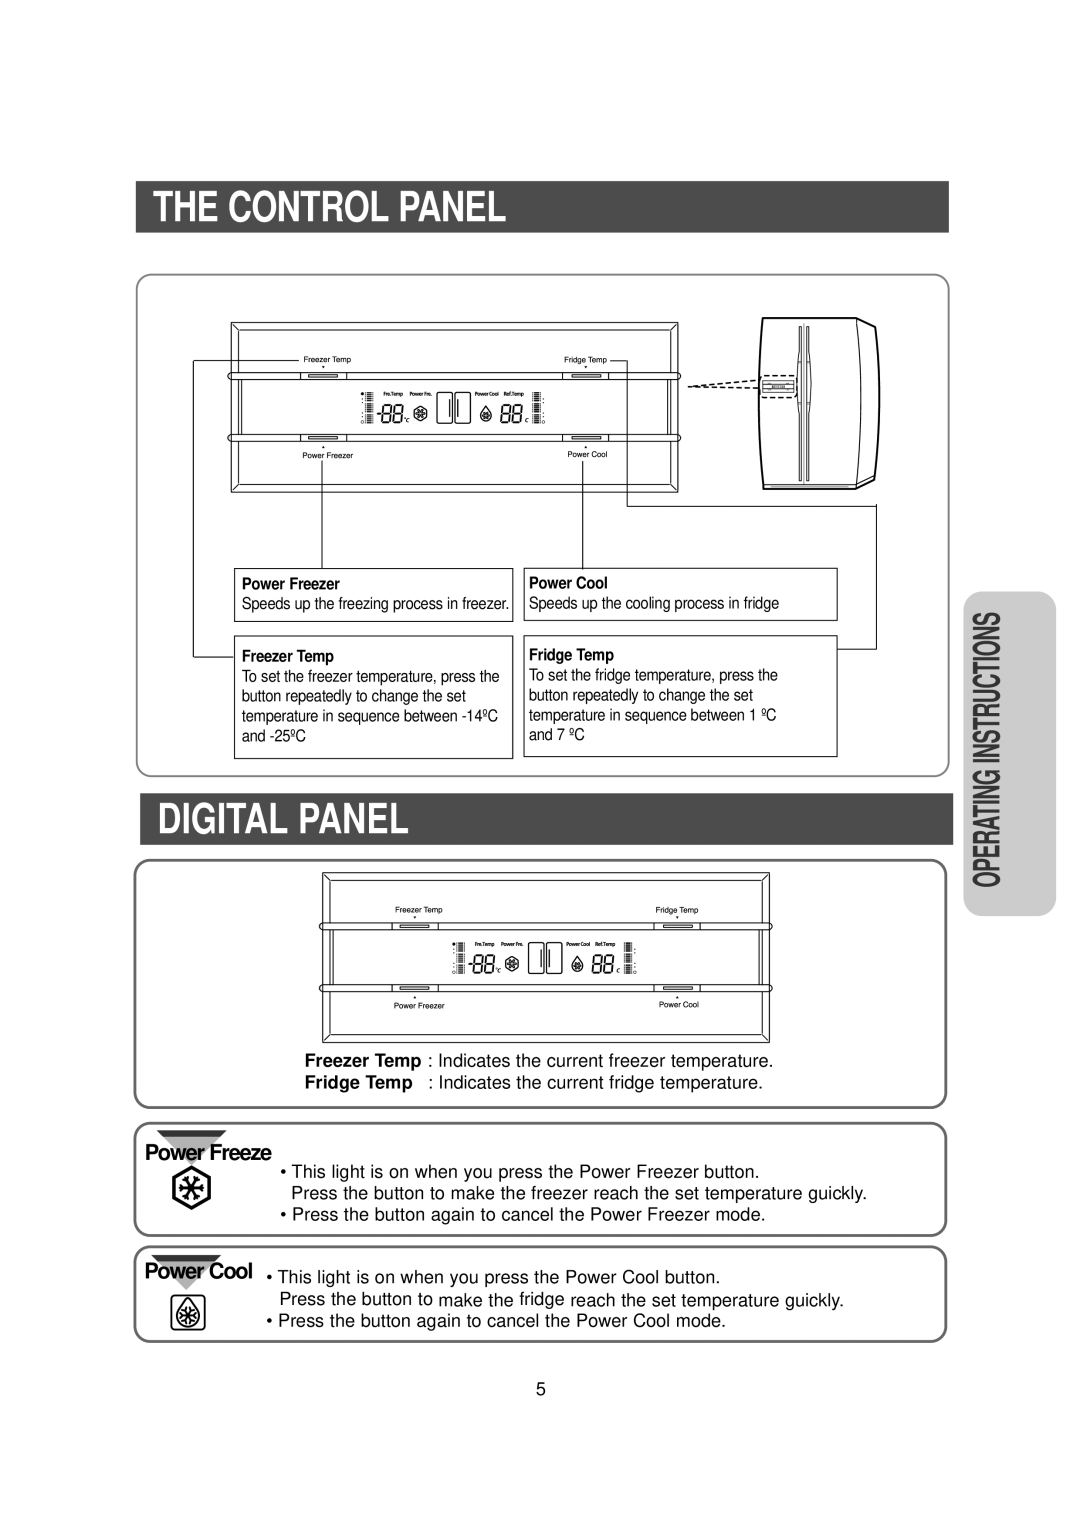 Samsung RS20 owner manual The Control Panel, Digital Panel, Power Freeze, Instructions, Operating 